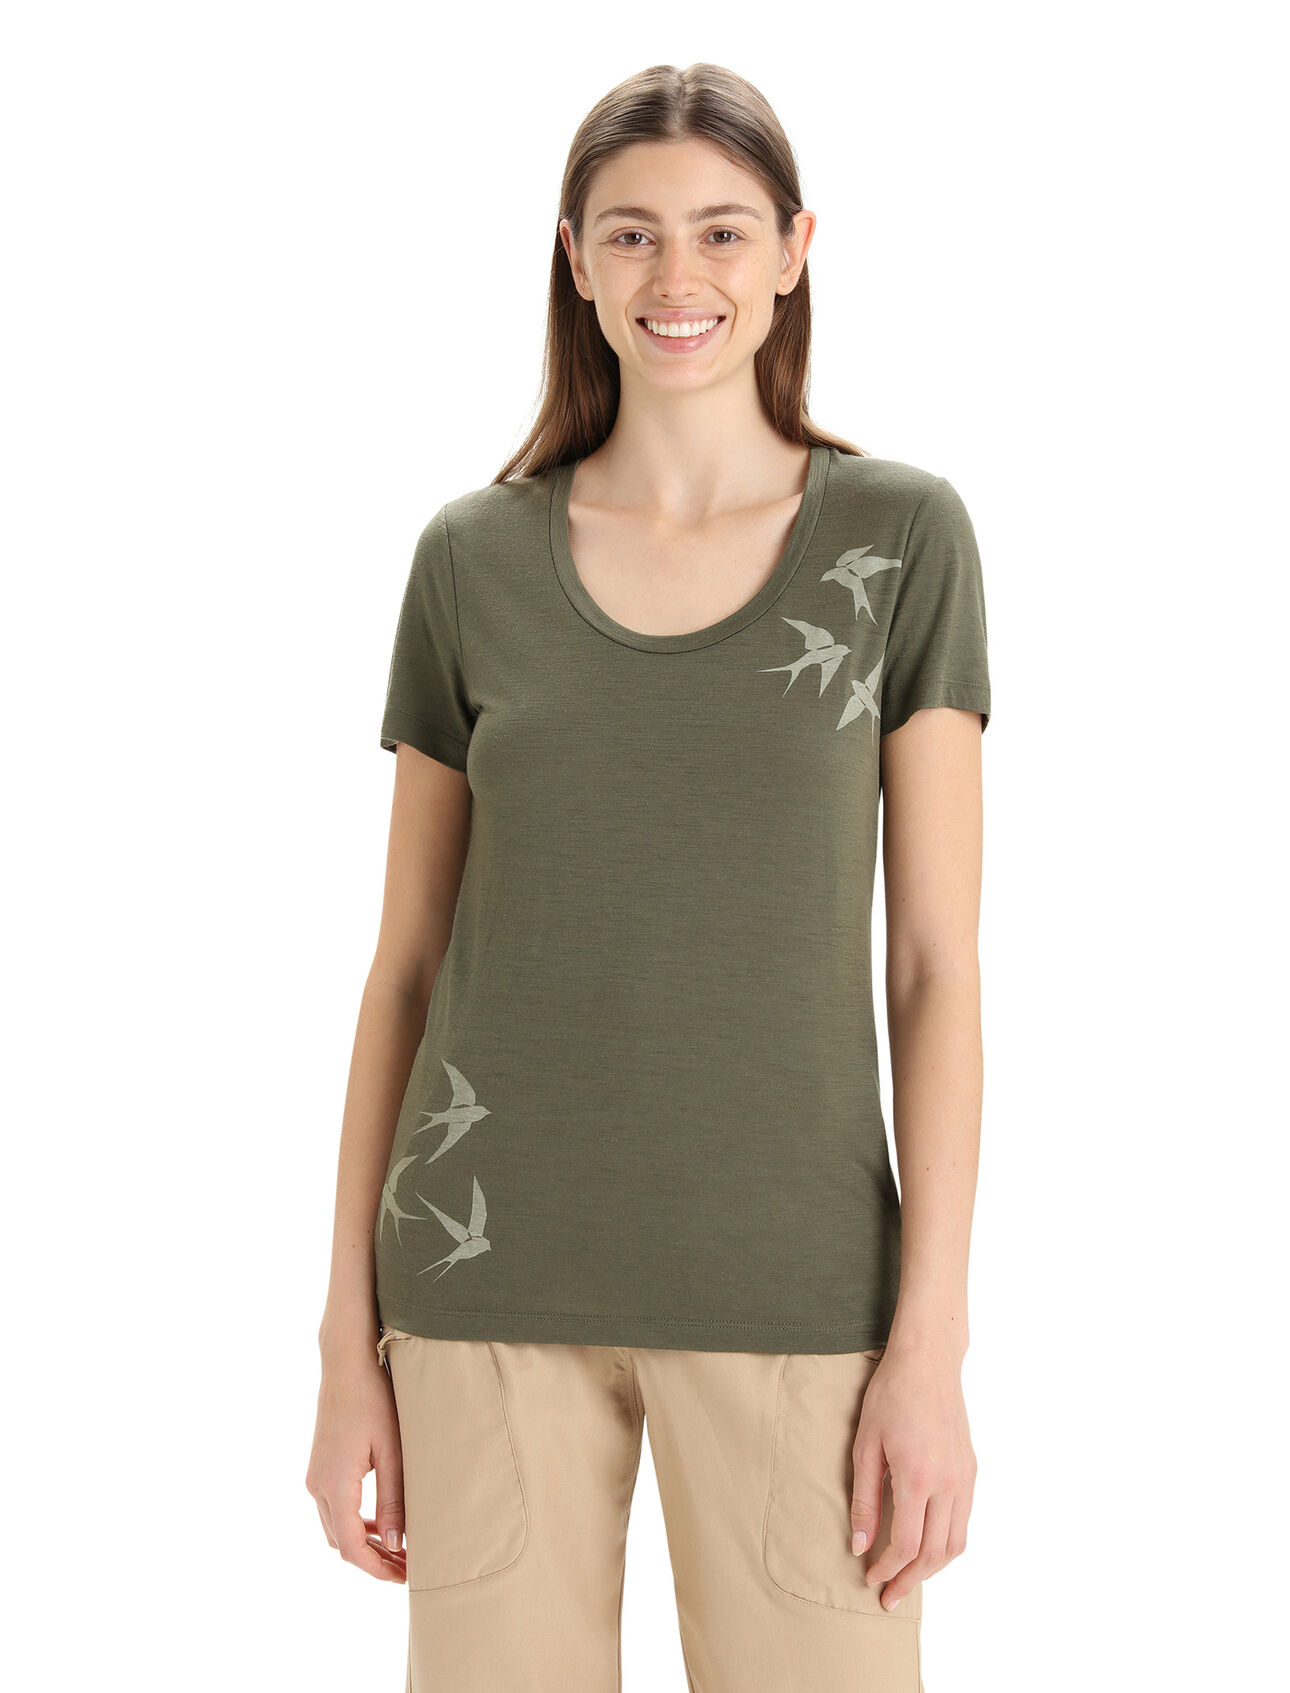 Womens Merino Tech Lite II Short Sleeve Scoop T-Shirt Swarming Shapes Our versatile Tech Tee that provides comfort, breathability and odor-resistance for any adventure you can think of, the Tech Lite II Short Sleeve Scoop Tee Swarming Shapes features 100% merino for all-natural performance. The original artwork draws inspiration from a murmuration—a natural phenomenon of flocking birds.